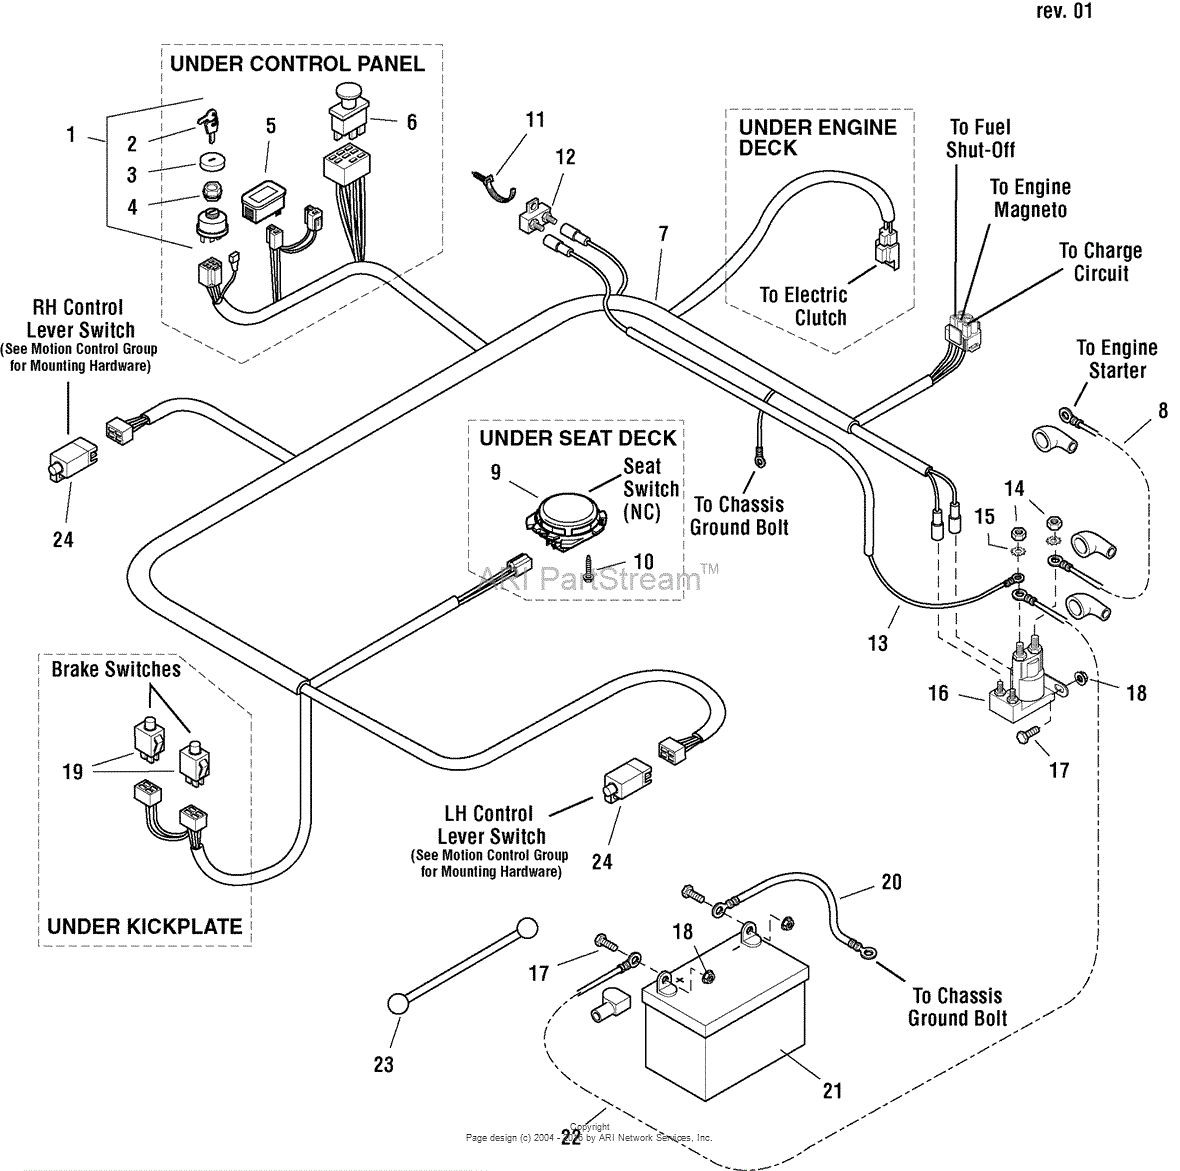 3497644 Ignition Switch Wiring Diagram - 29 Lawn Mower Ignition Switch ...